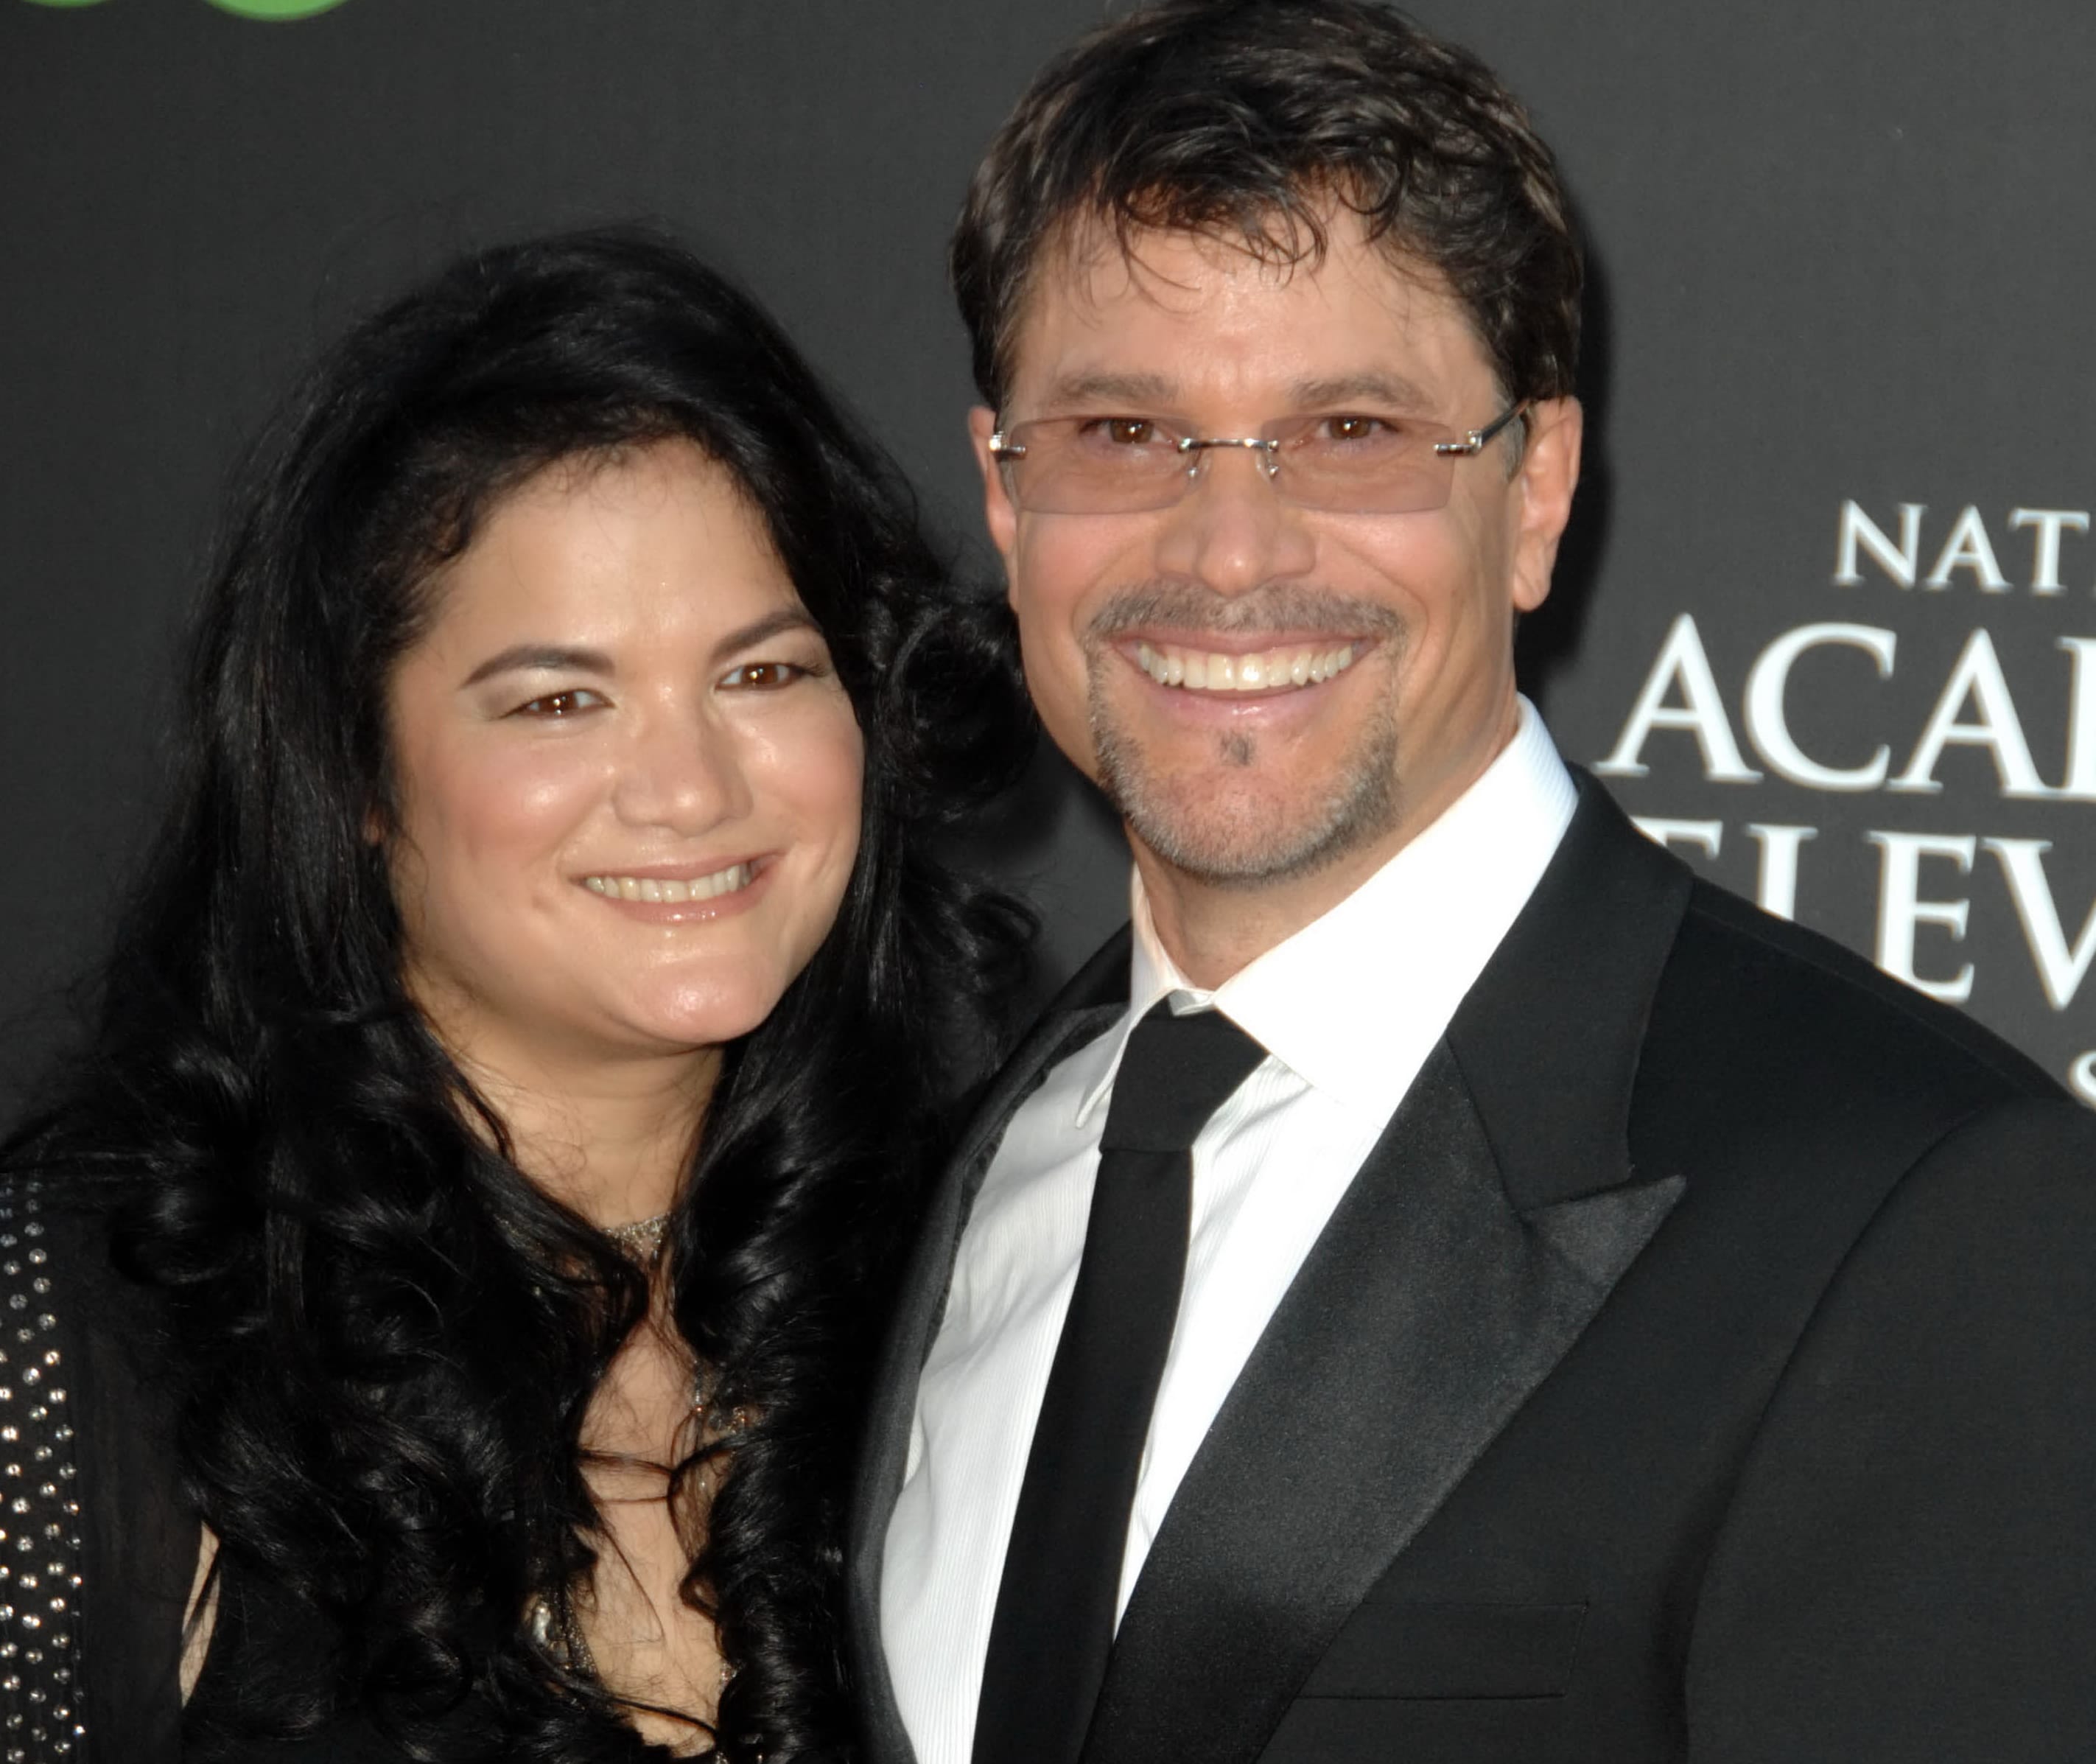 Where is Peter Reckell now? His Bio: Net Worth Today, Wife, Daughter, Family, Baby